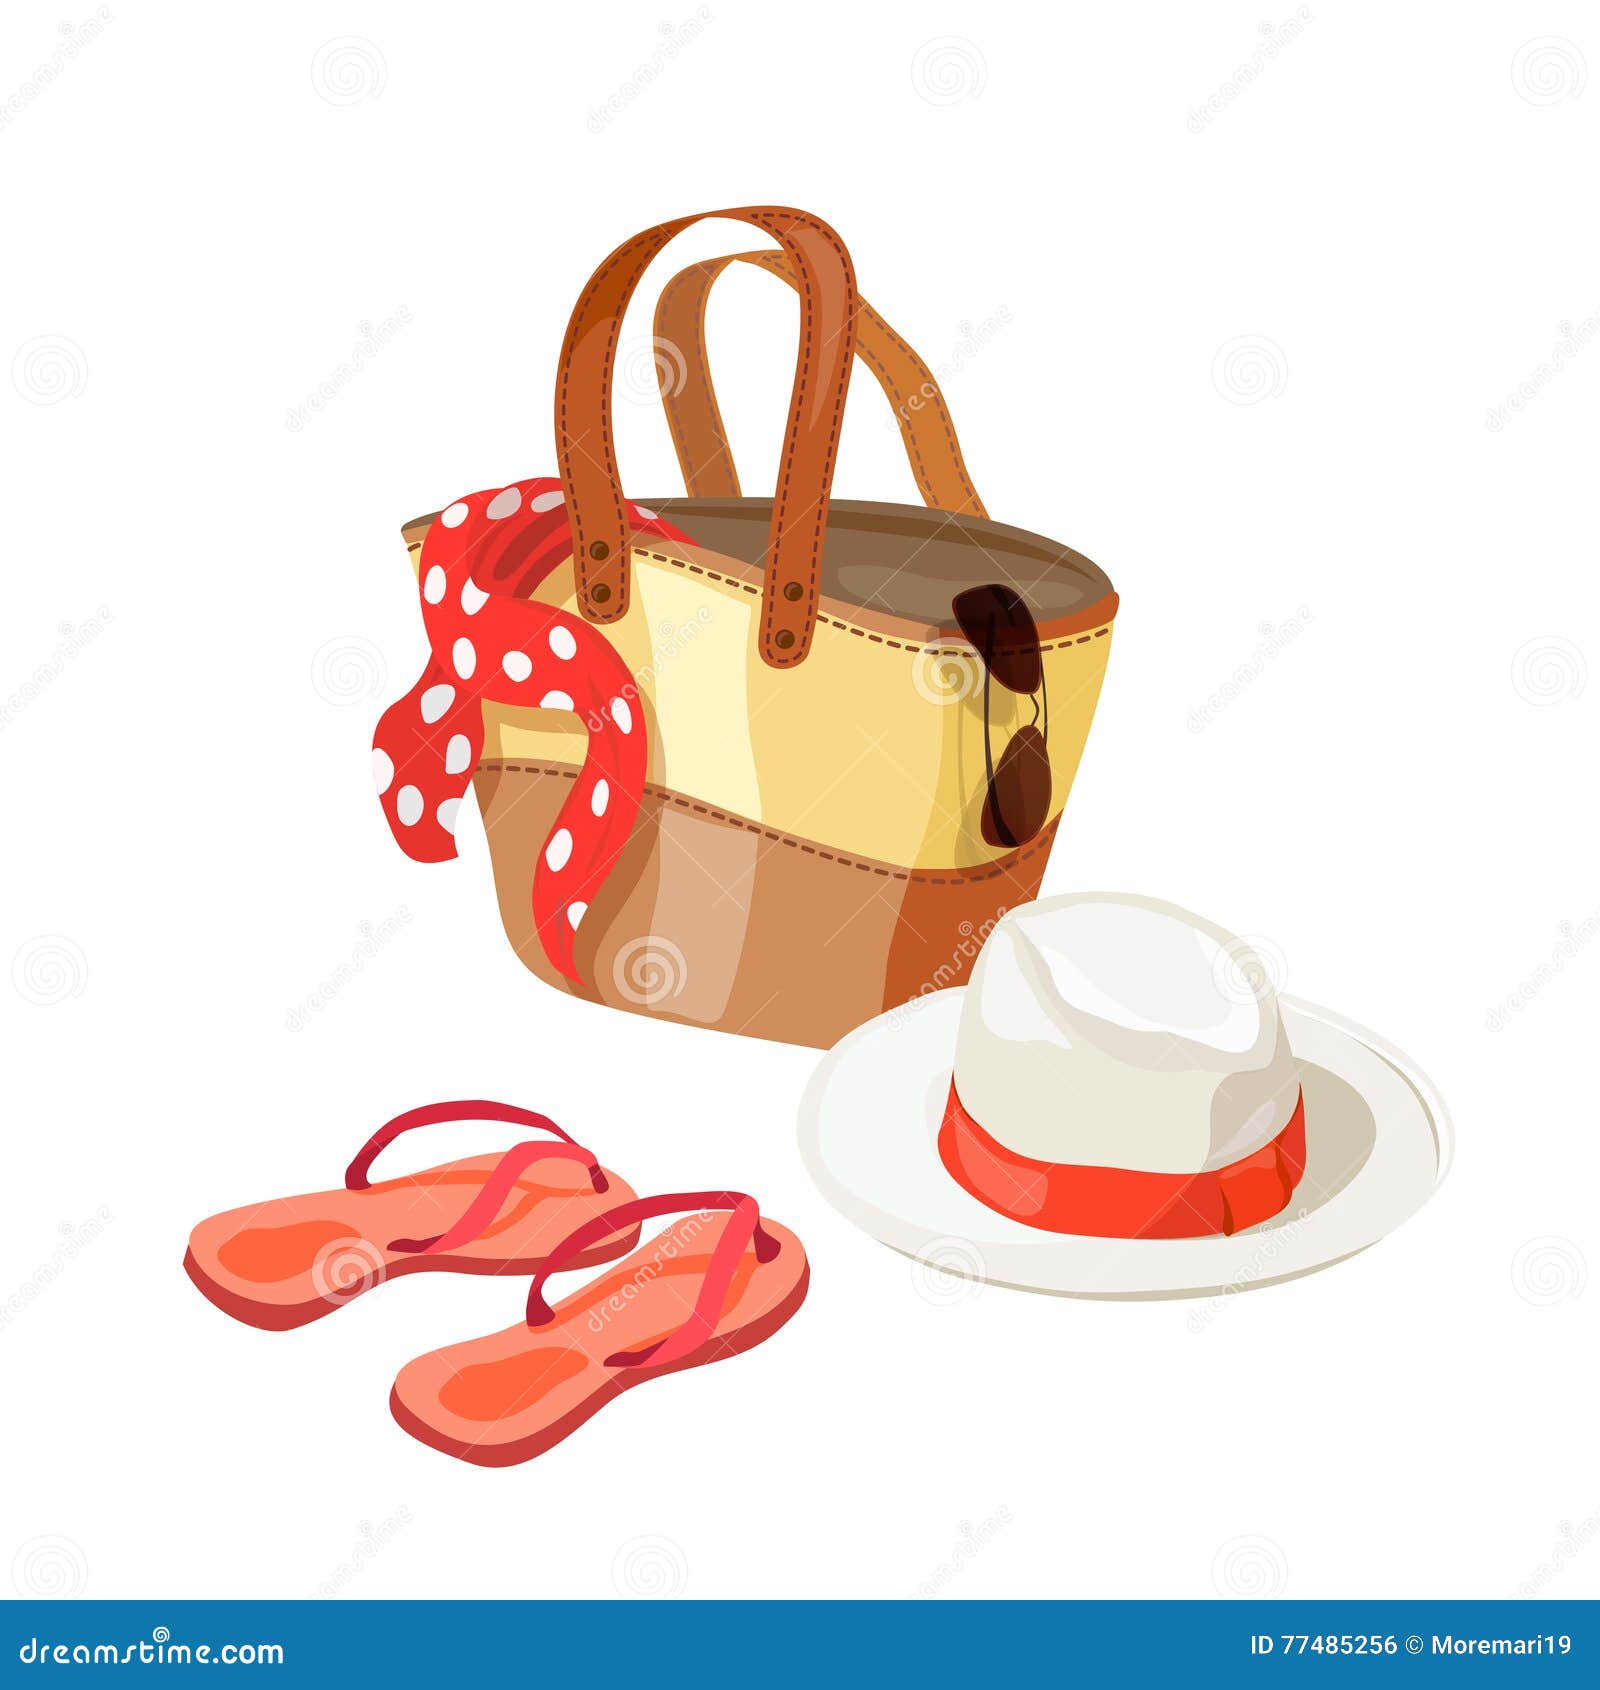 Womens beach accessories stock vector. Illustration of holiday - 77485256